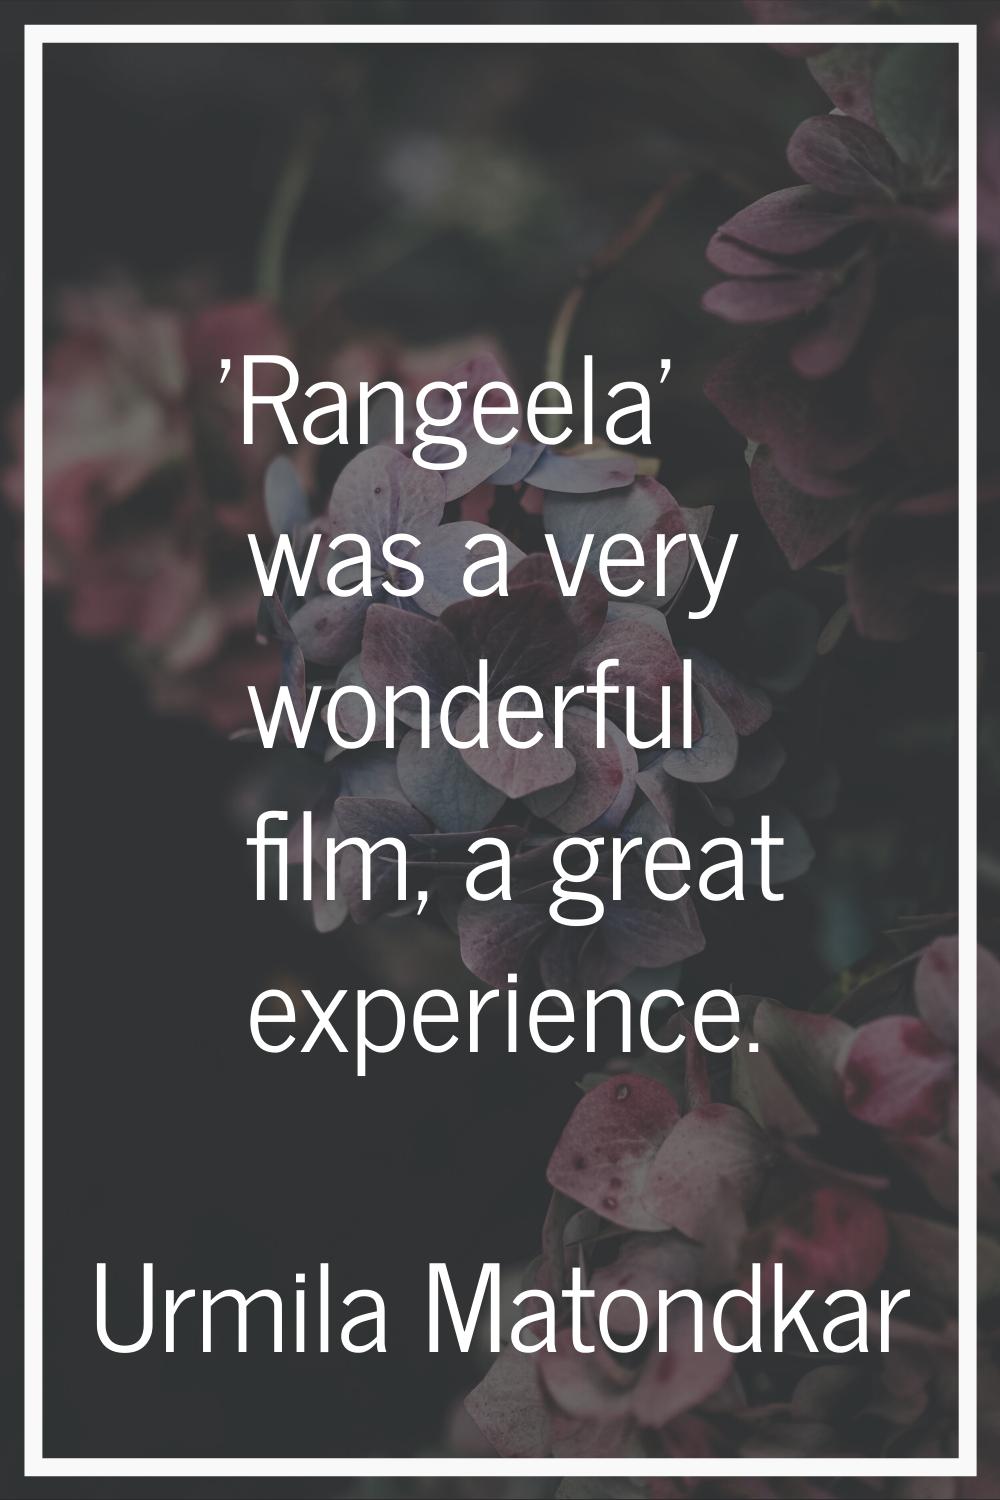 'Rangeela' was a very wonderful film, a great experience.